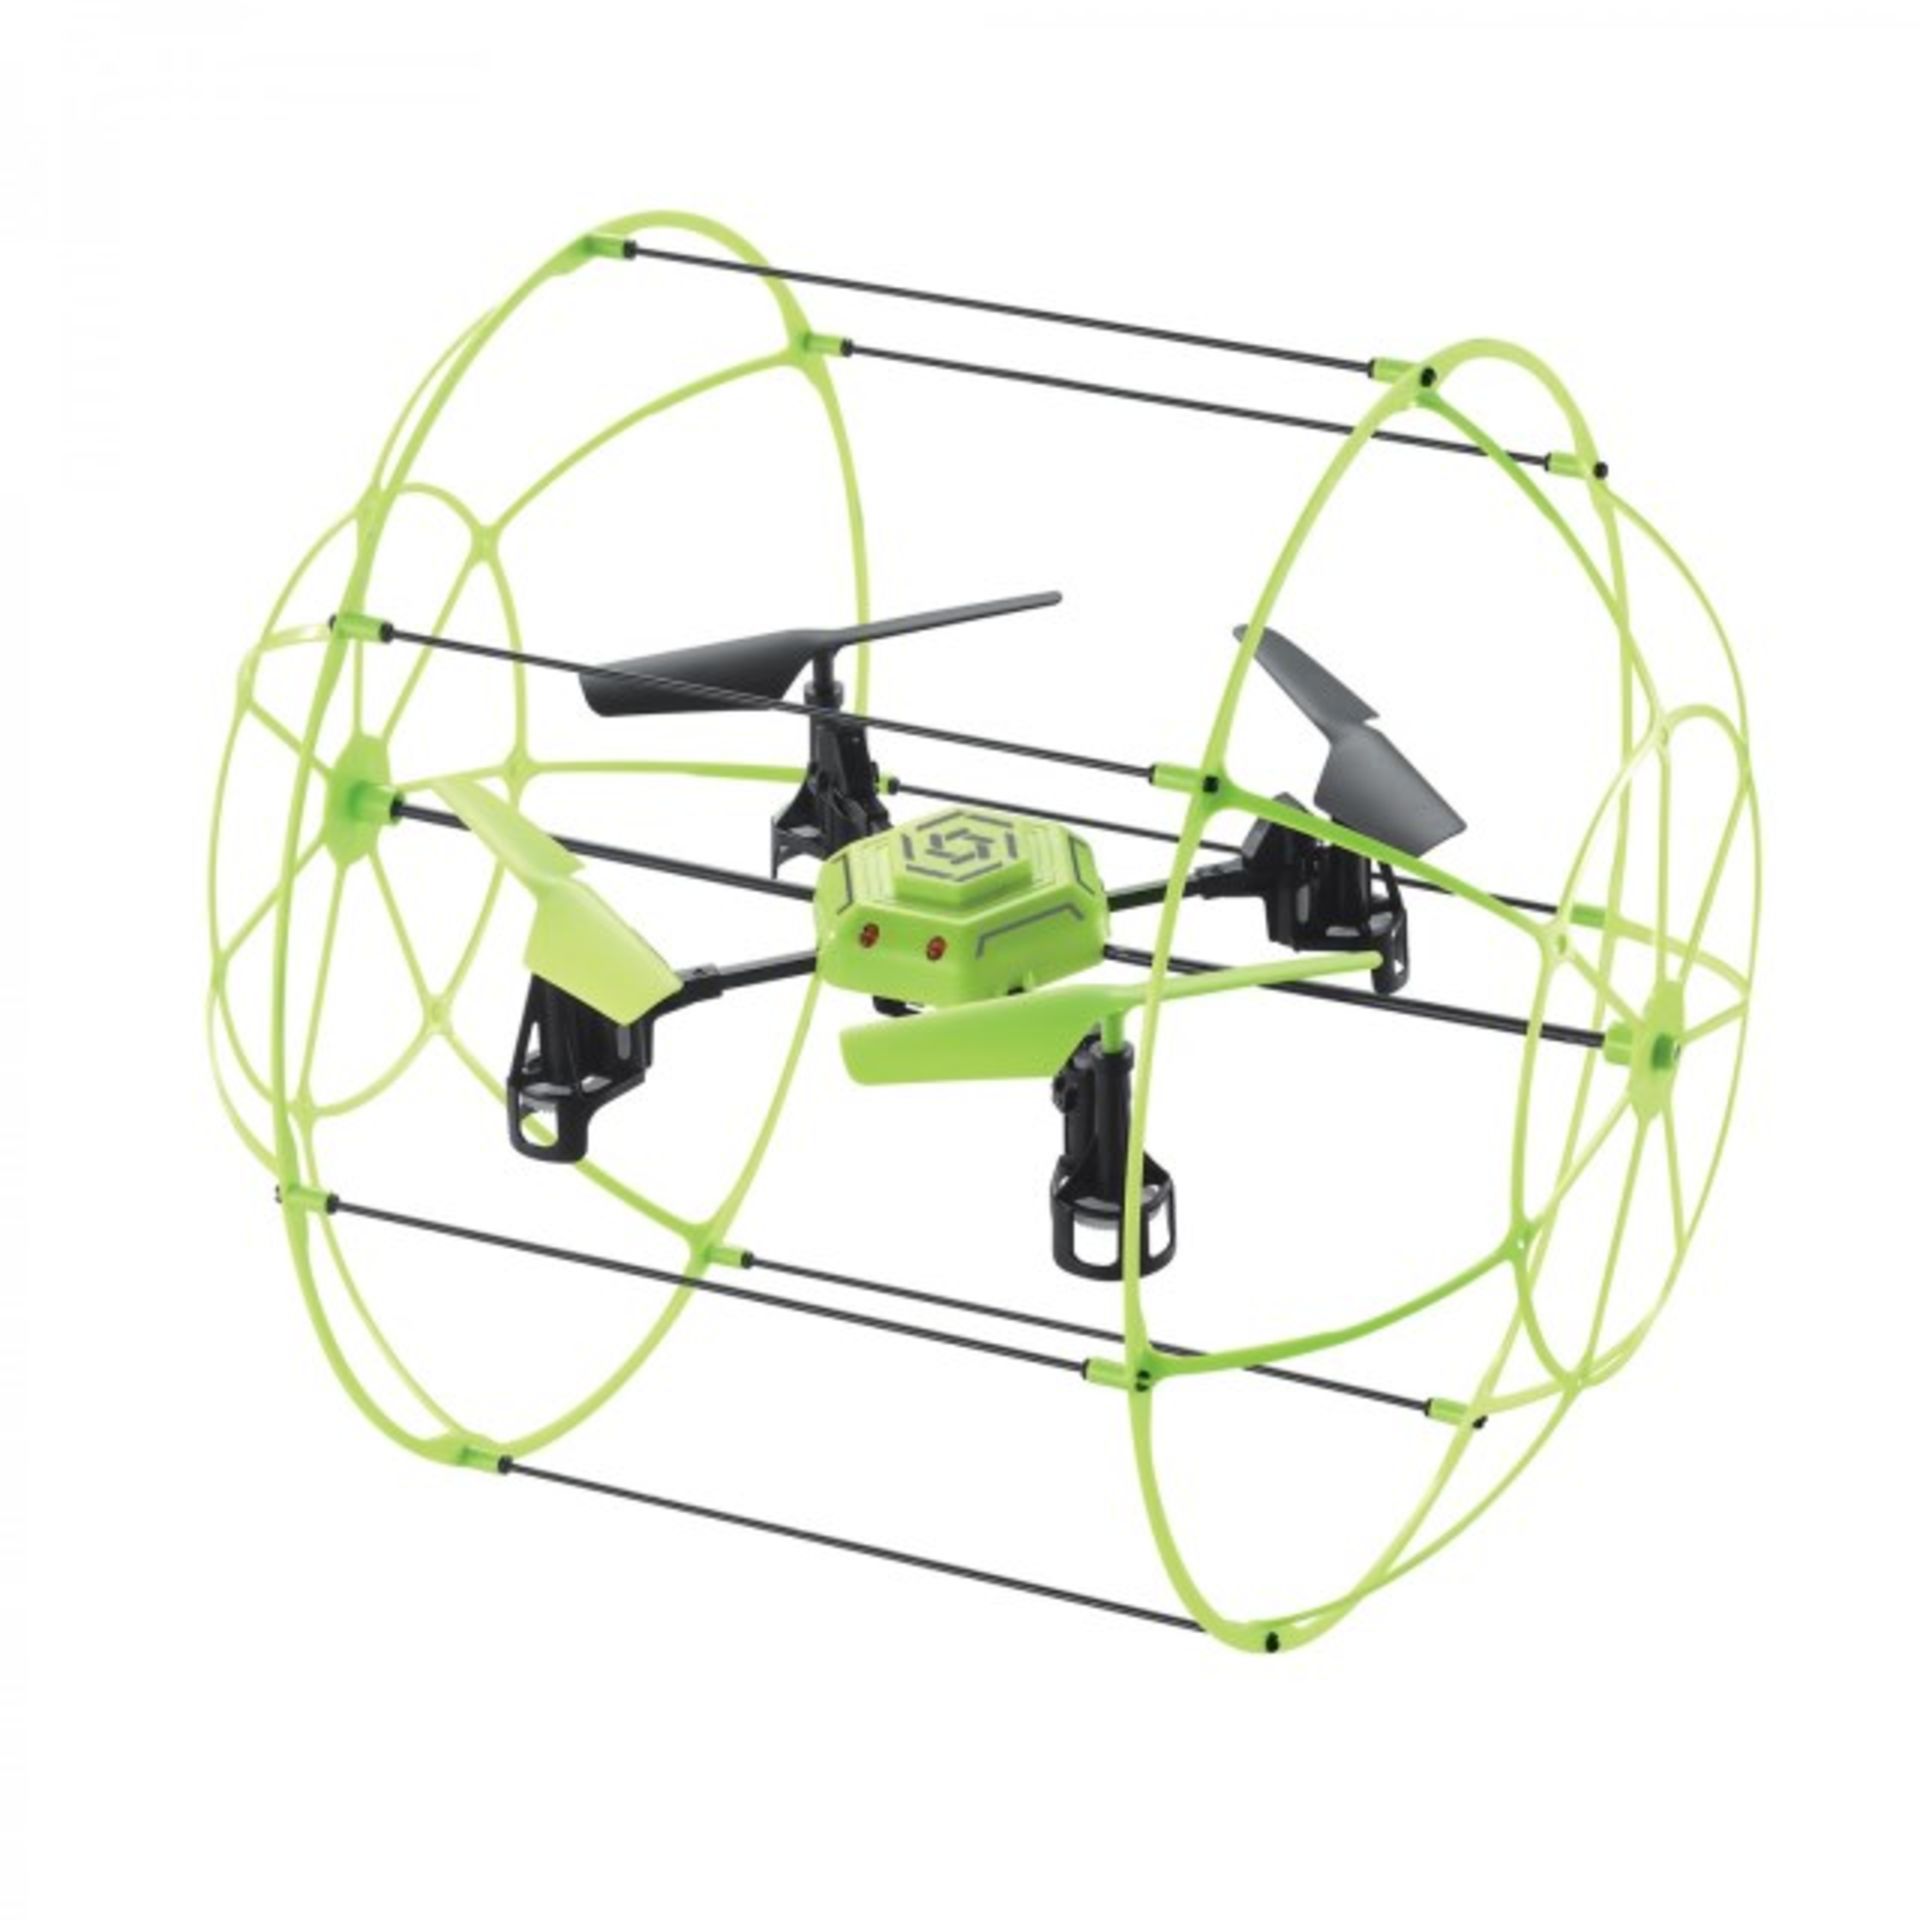 + VAT Brand New Galaxy Destroyer 2.4G Quadcopter Aerocraft - Easy To Fly Technology - Impact